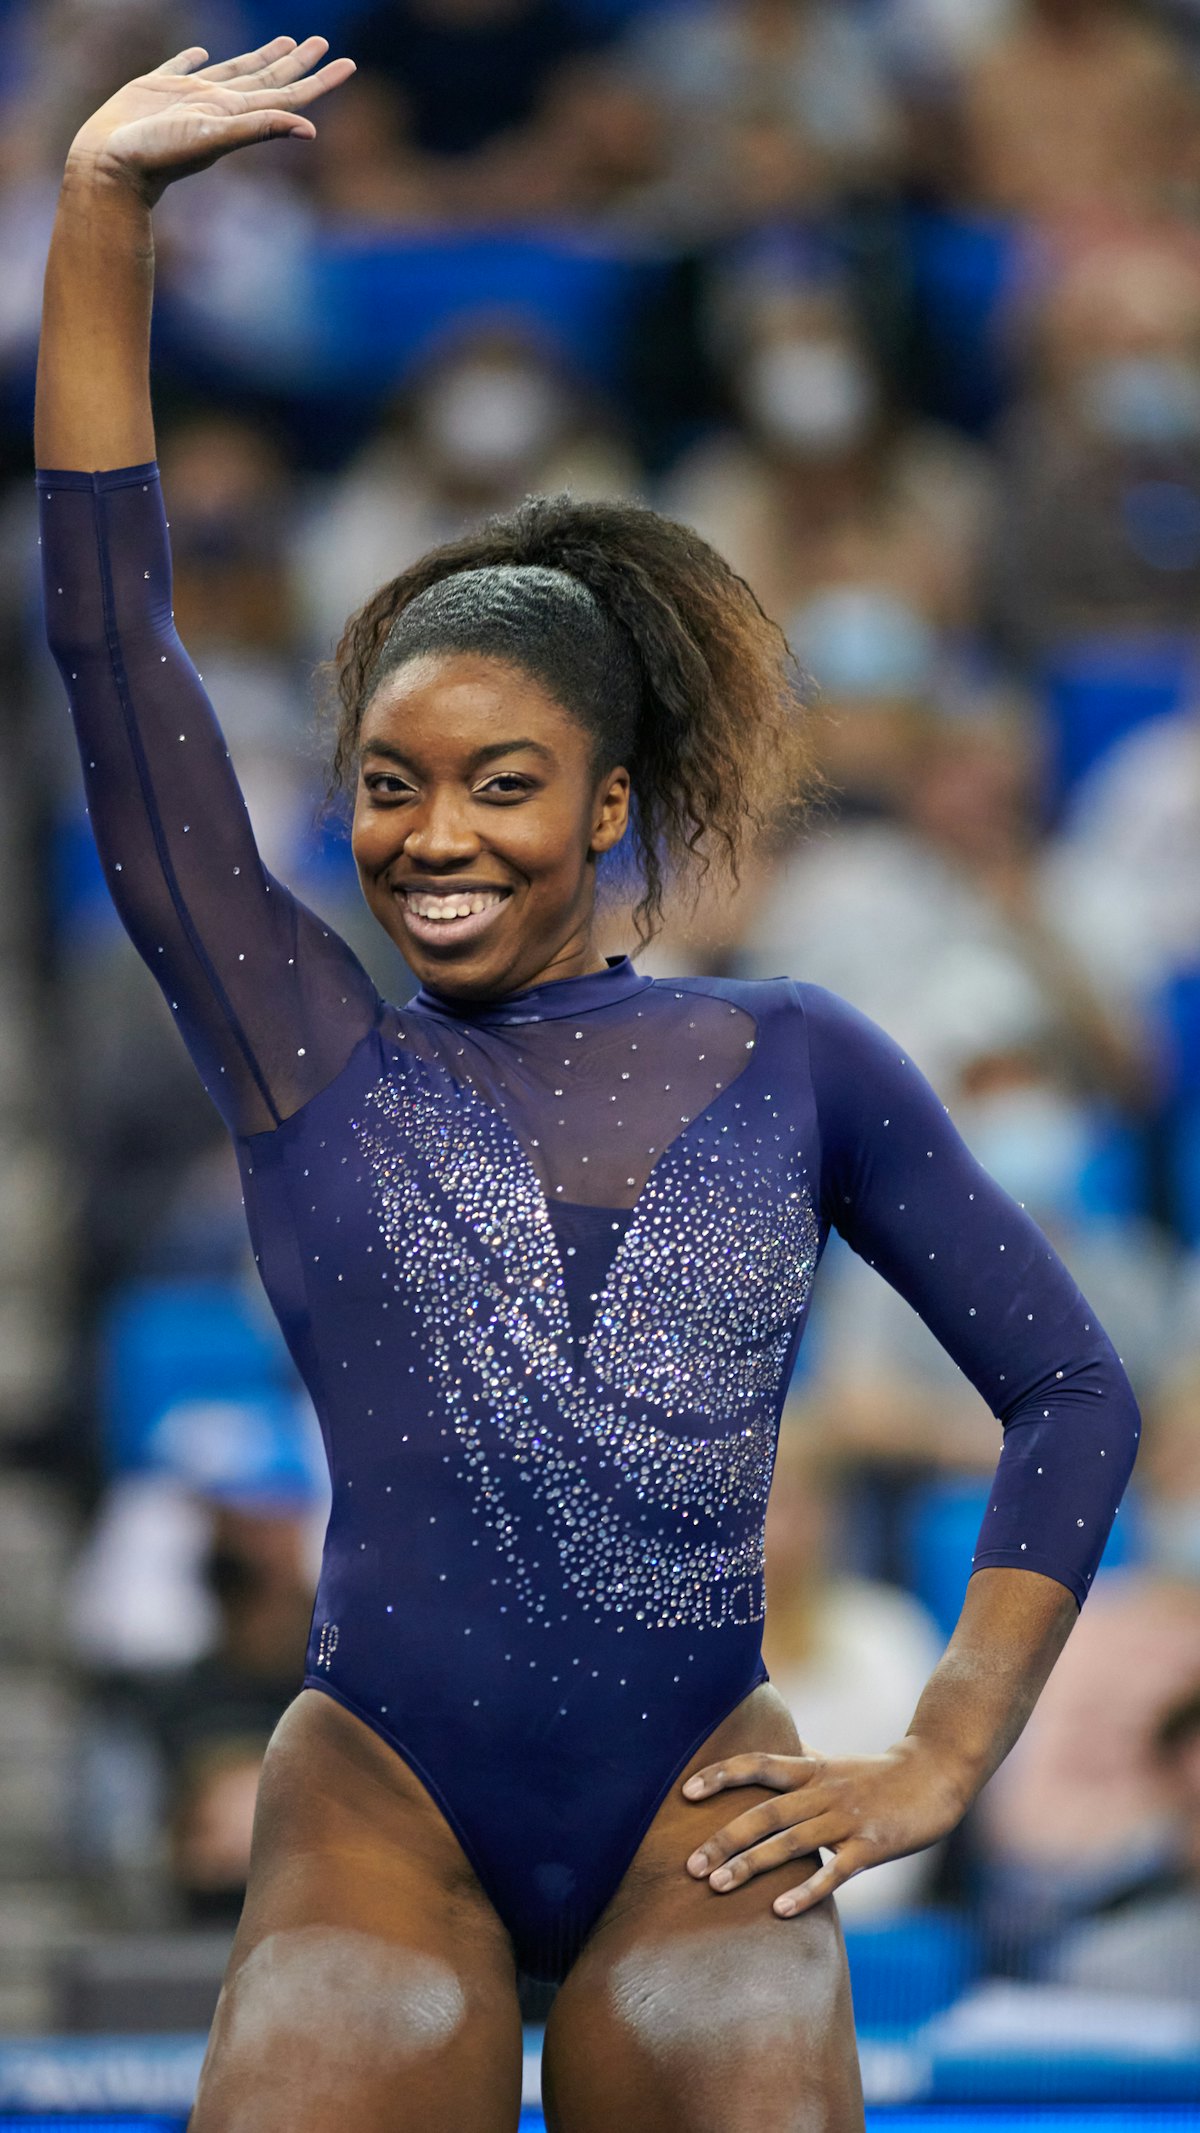 Collegiate Gymnastics Provides a Platform for Social Expression. | Diverse:  Issues In Higher Education